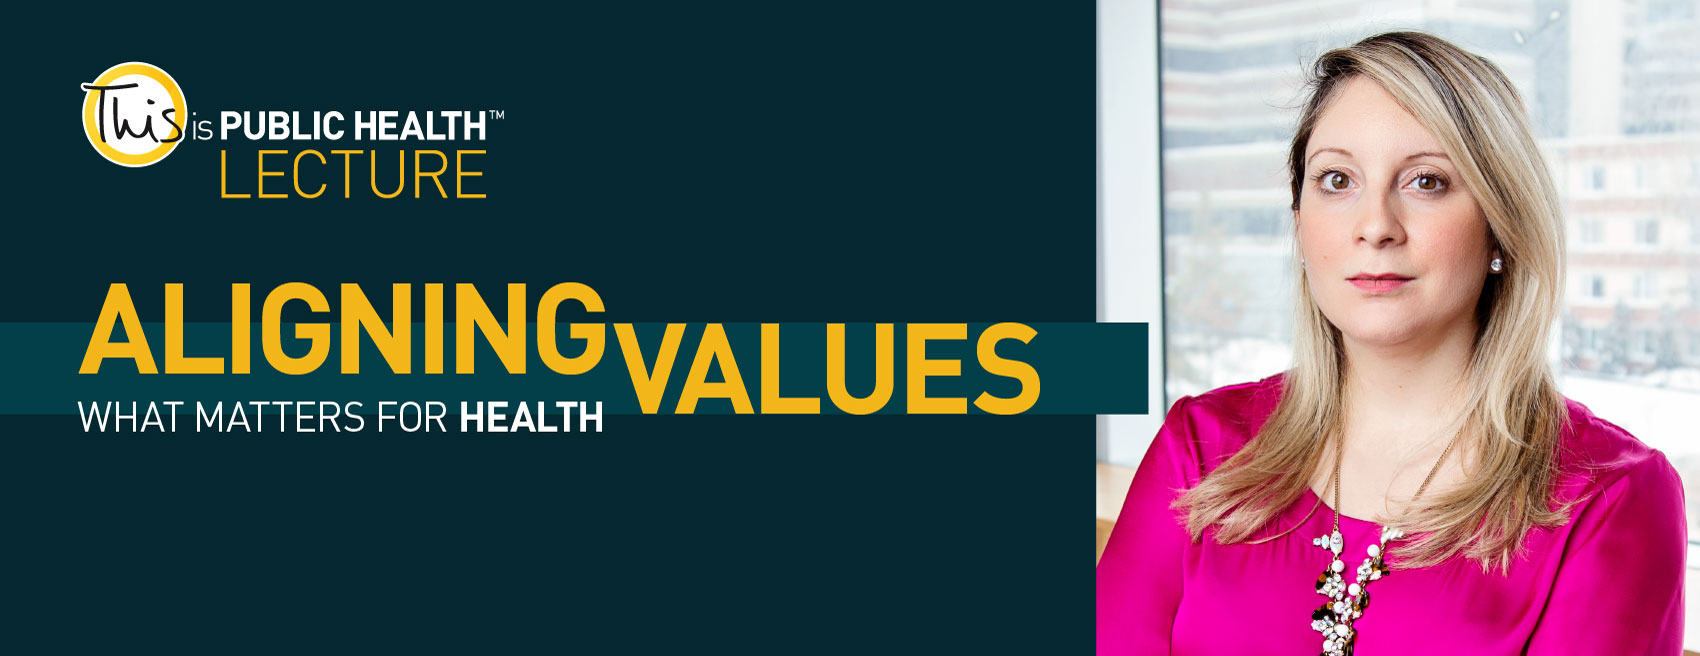 Aligning values: What matters for health